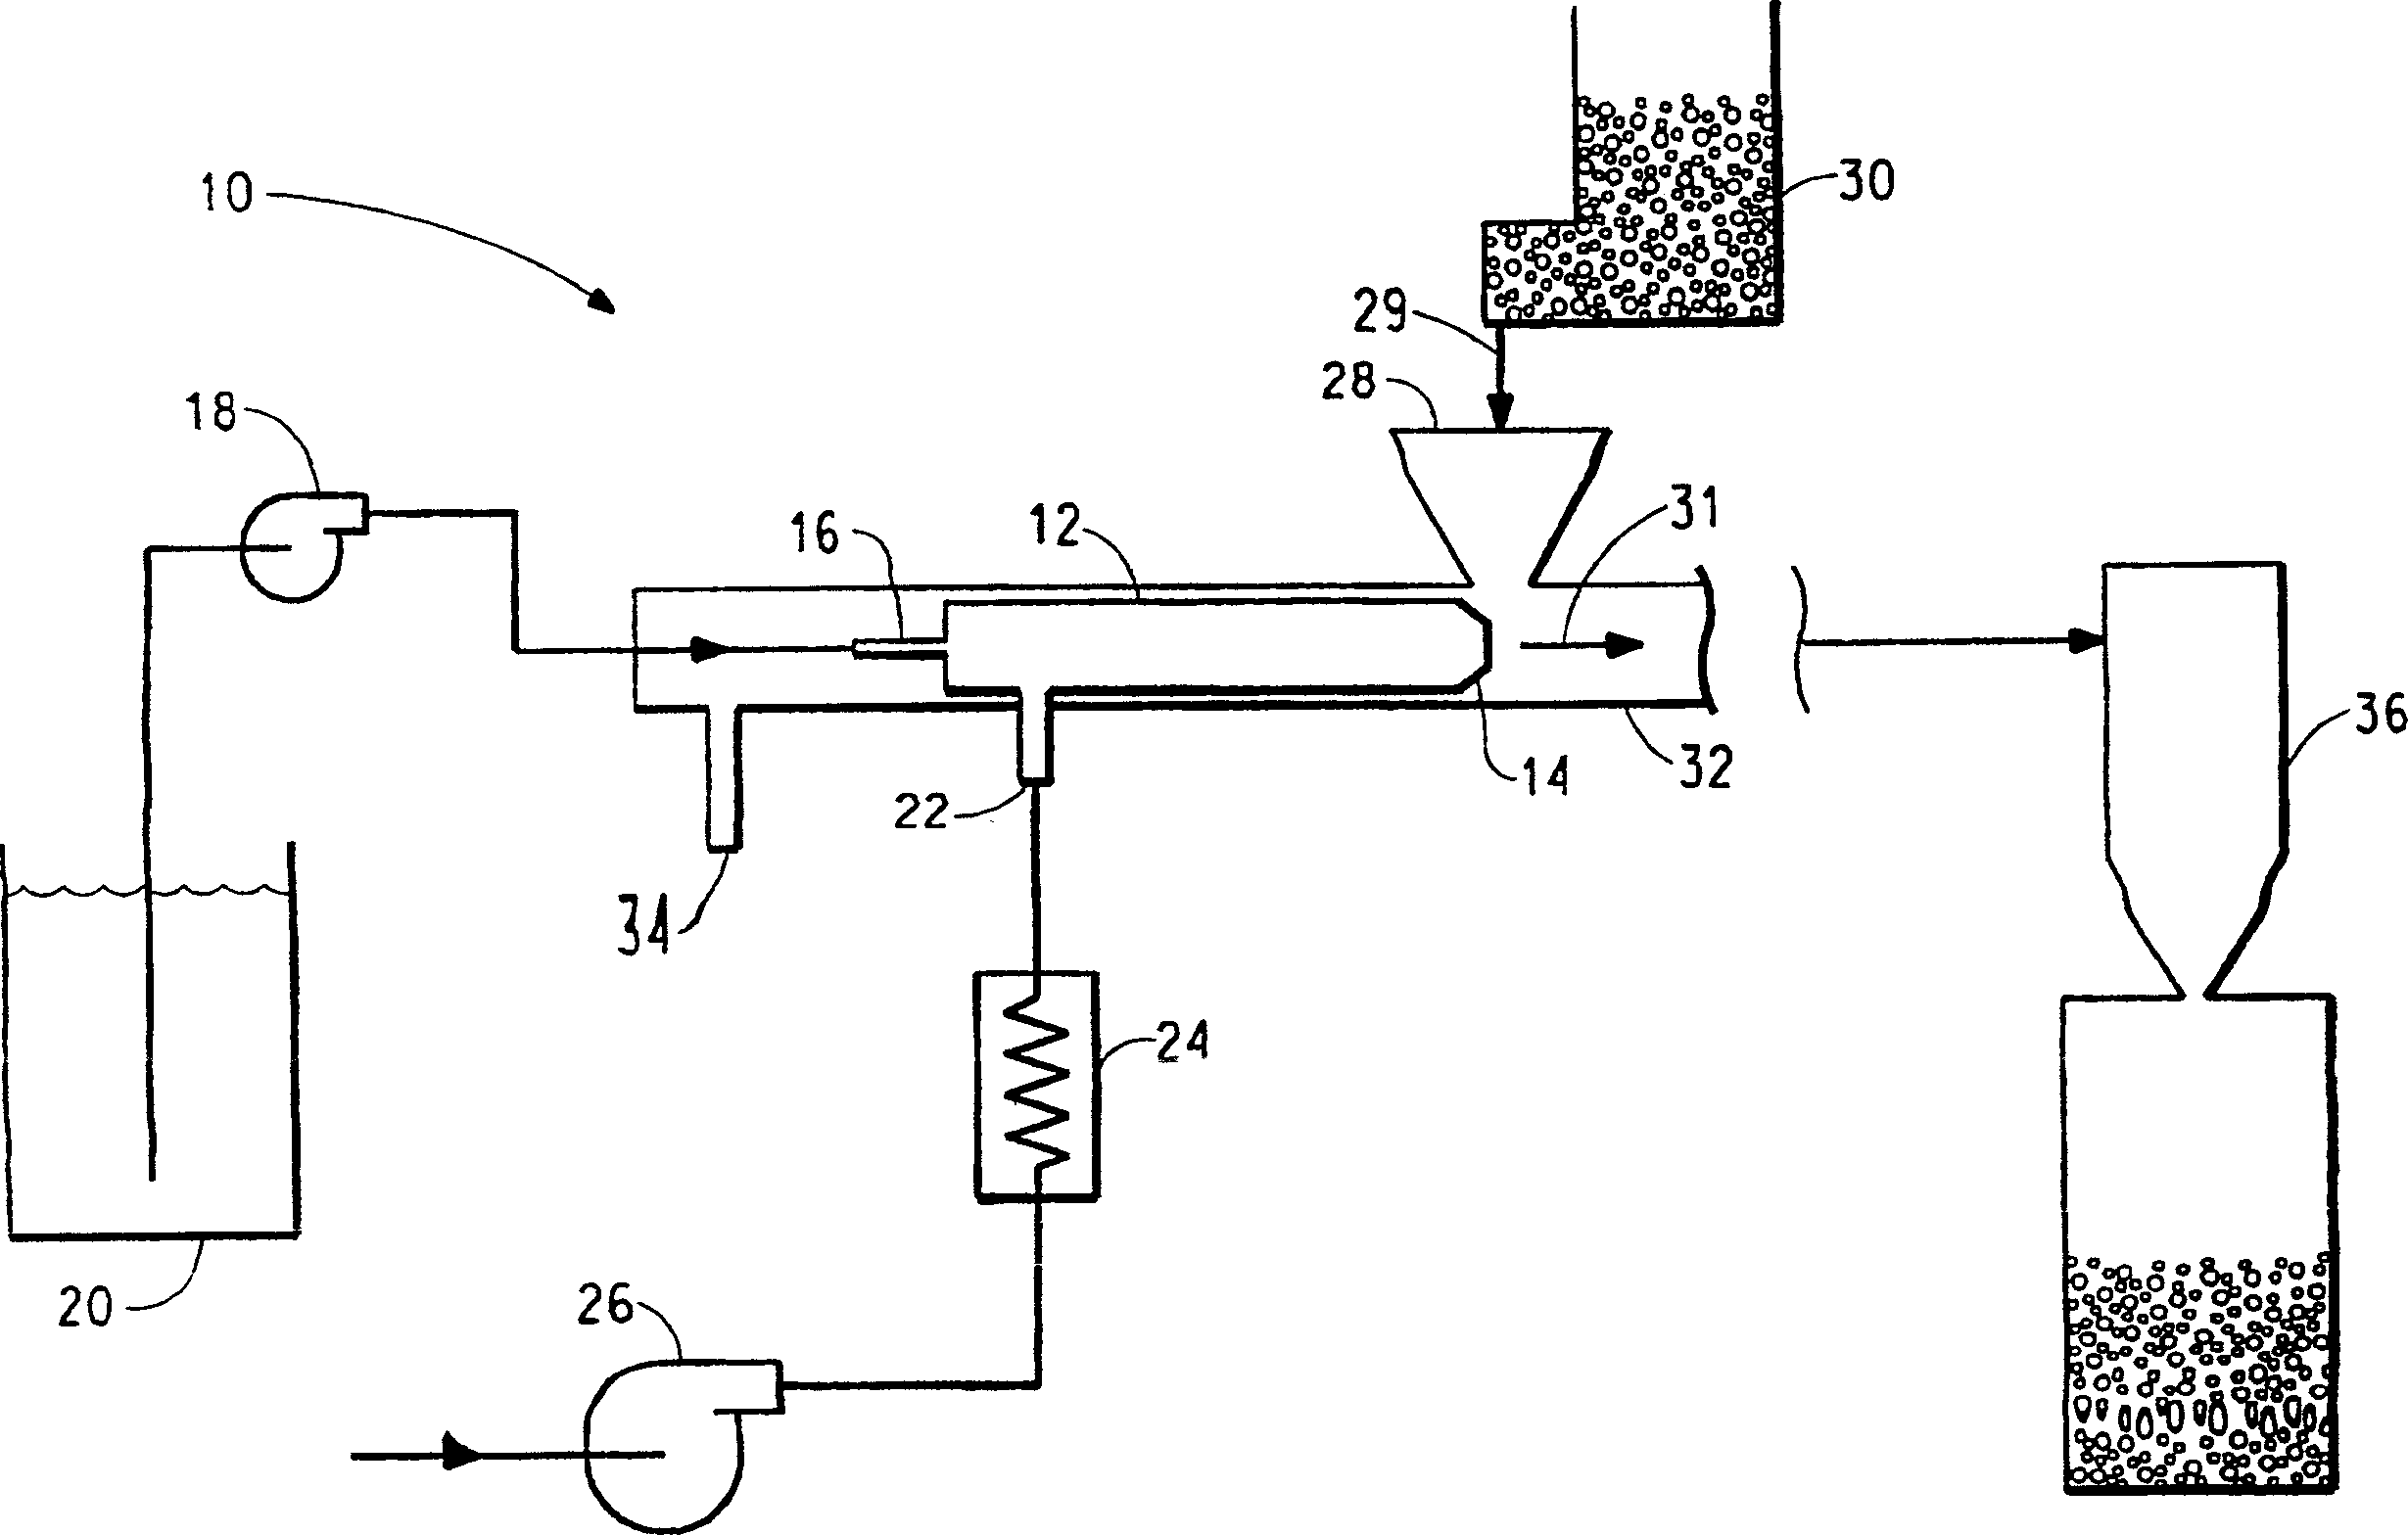 Process for coating a pharmaceutical particle